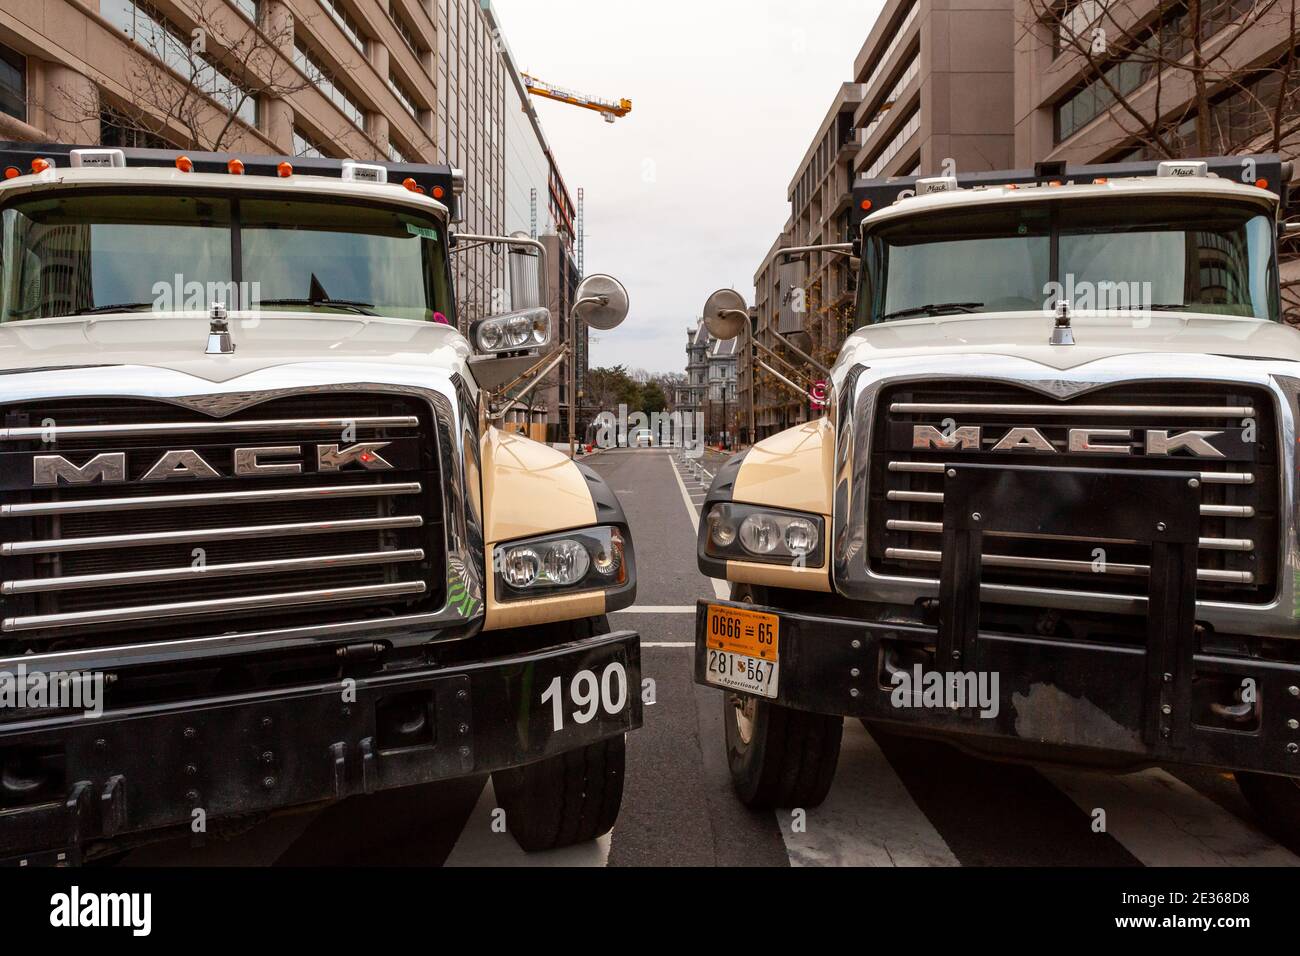 Washington, DC, USA 16 January, 2021.  Pictured: Two enormous Mack trucks block F Street NW in preparation for the presidential inauguration of Joe Biden.  Preparations and security measures were instituted far earlier than usual due to the threat of violence posed by Trump supporters, white supremacists, and other right-wing exremists.  Credit: Allison C Bailey/Alamy Live News Stock Photo